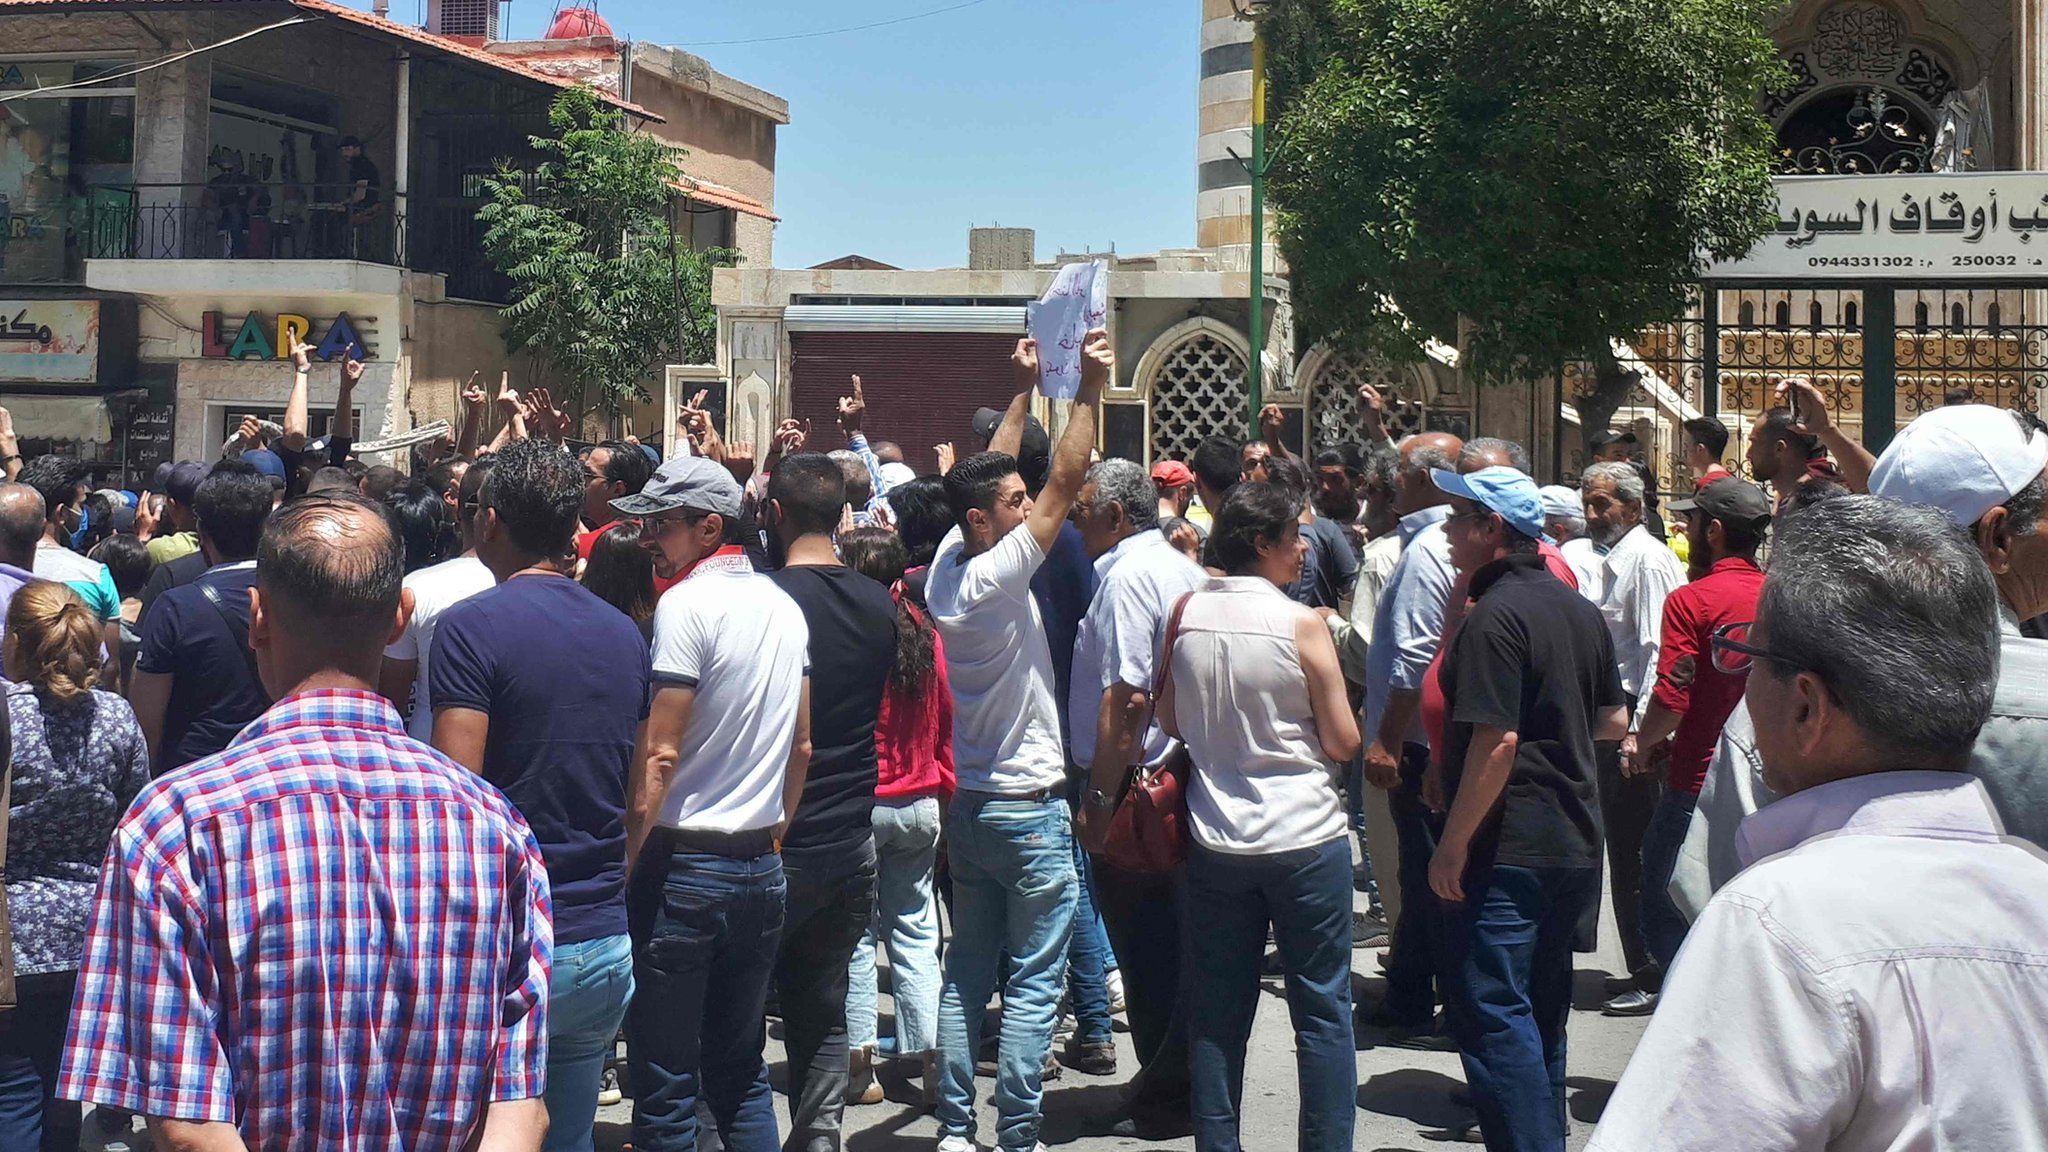 Photo provided by news outlet Suwayda24 showing anti-government protest in the city of Suweida on 9 June 2020